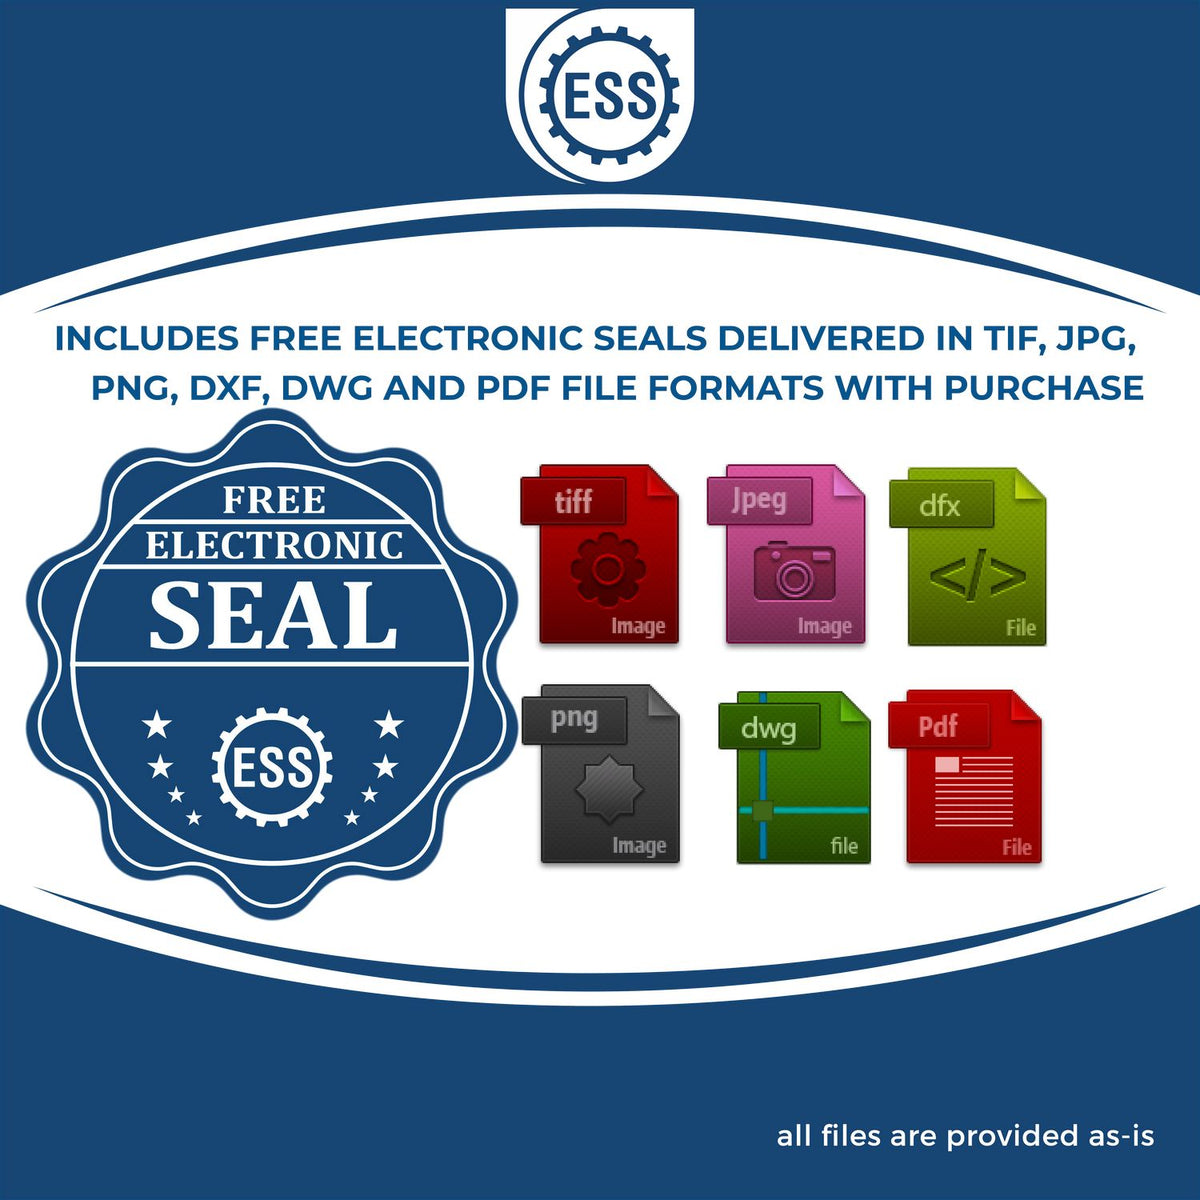 An infographic for the free electronic seal for the Kansas Desk Architect Embossing Seal illustrating the different file type icons such as DXF, DWG, TIF, JPG and PNG.